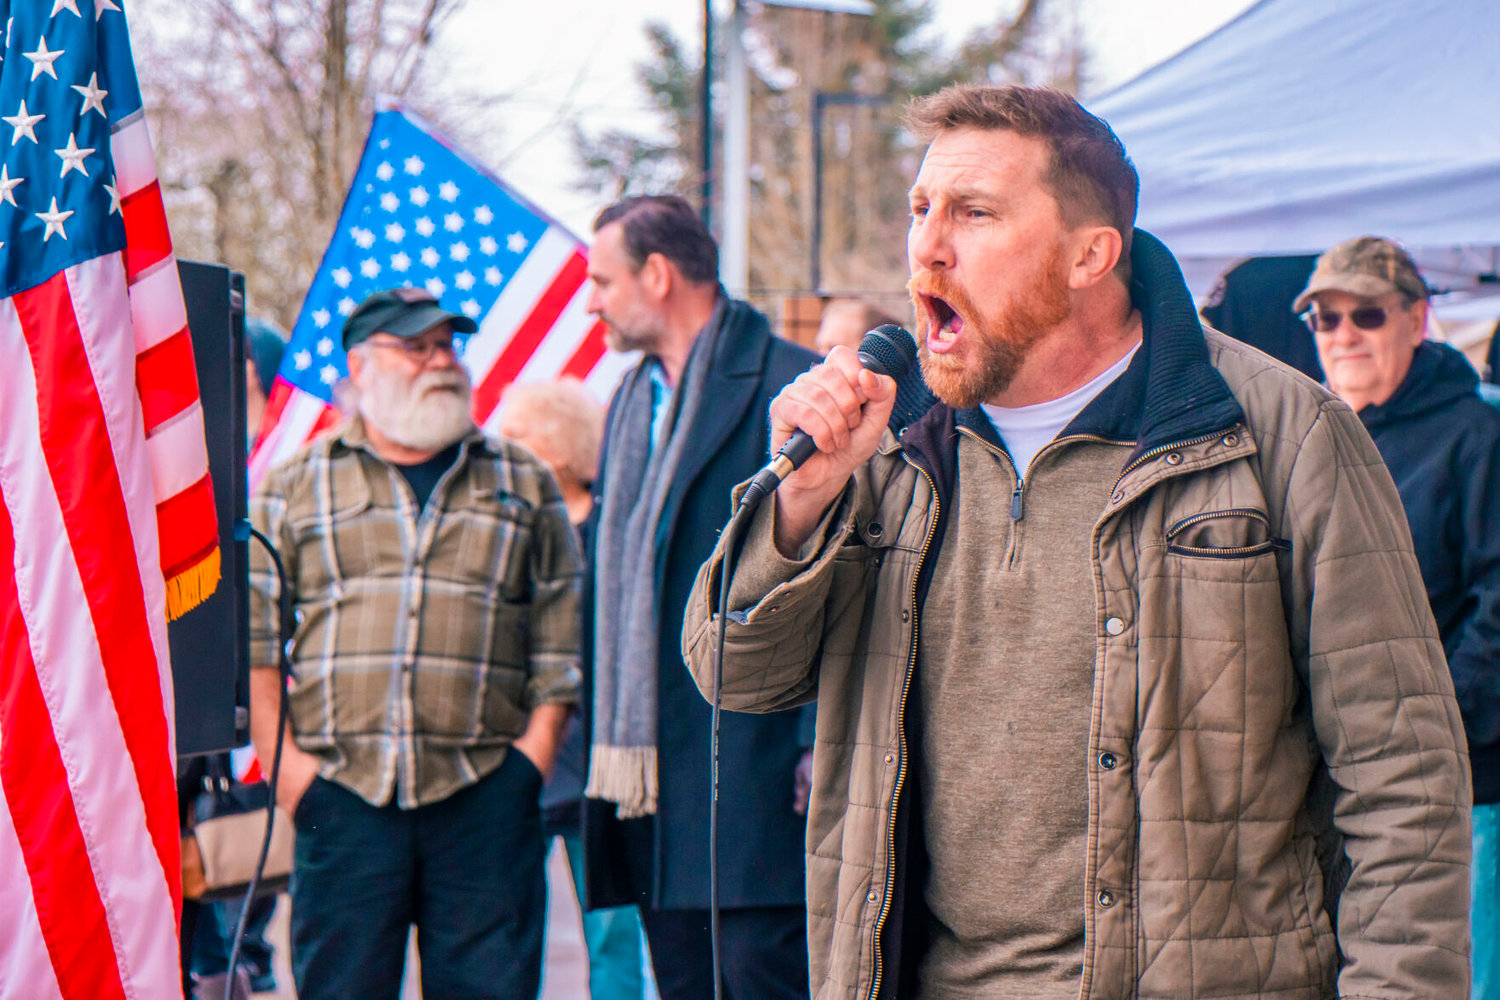 Erik Rohde, of the Washington Three Percenters, yells to crowds through a mic during a protest to ‘Open Yelm Now’ at Yelm City Park on Saturday.